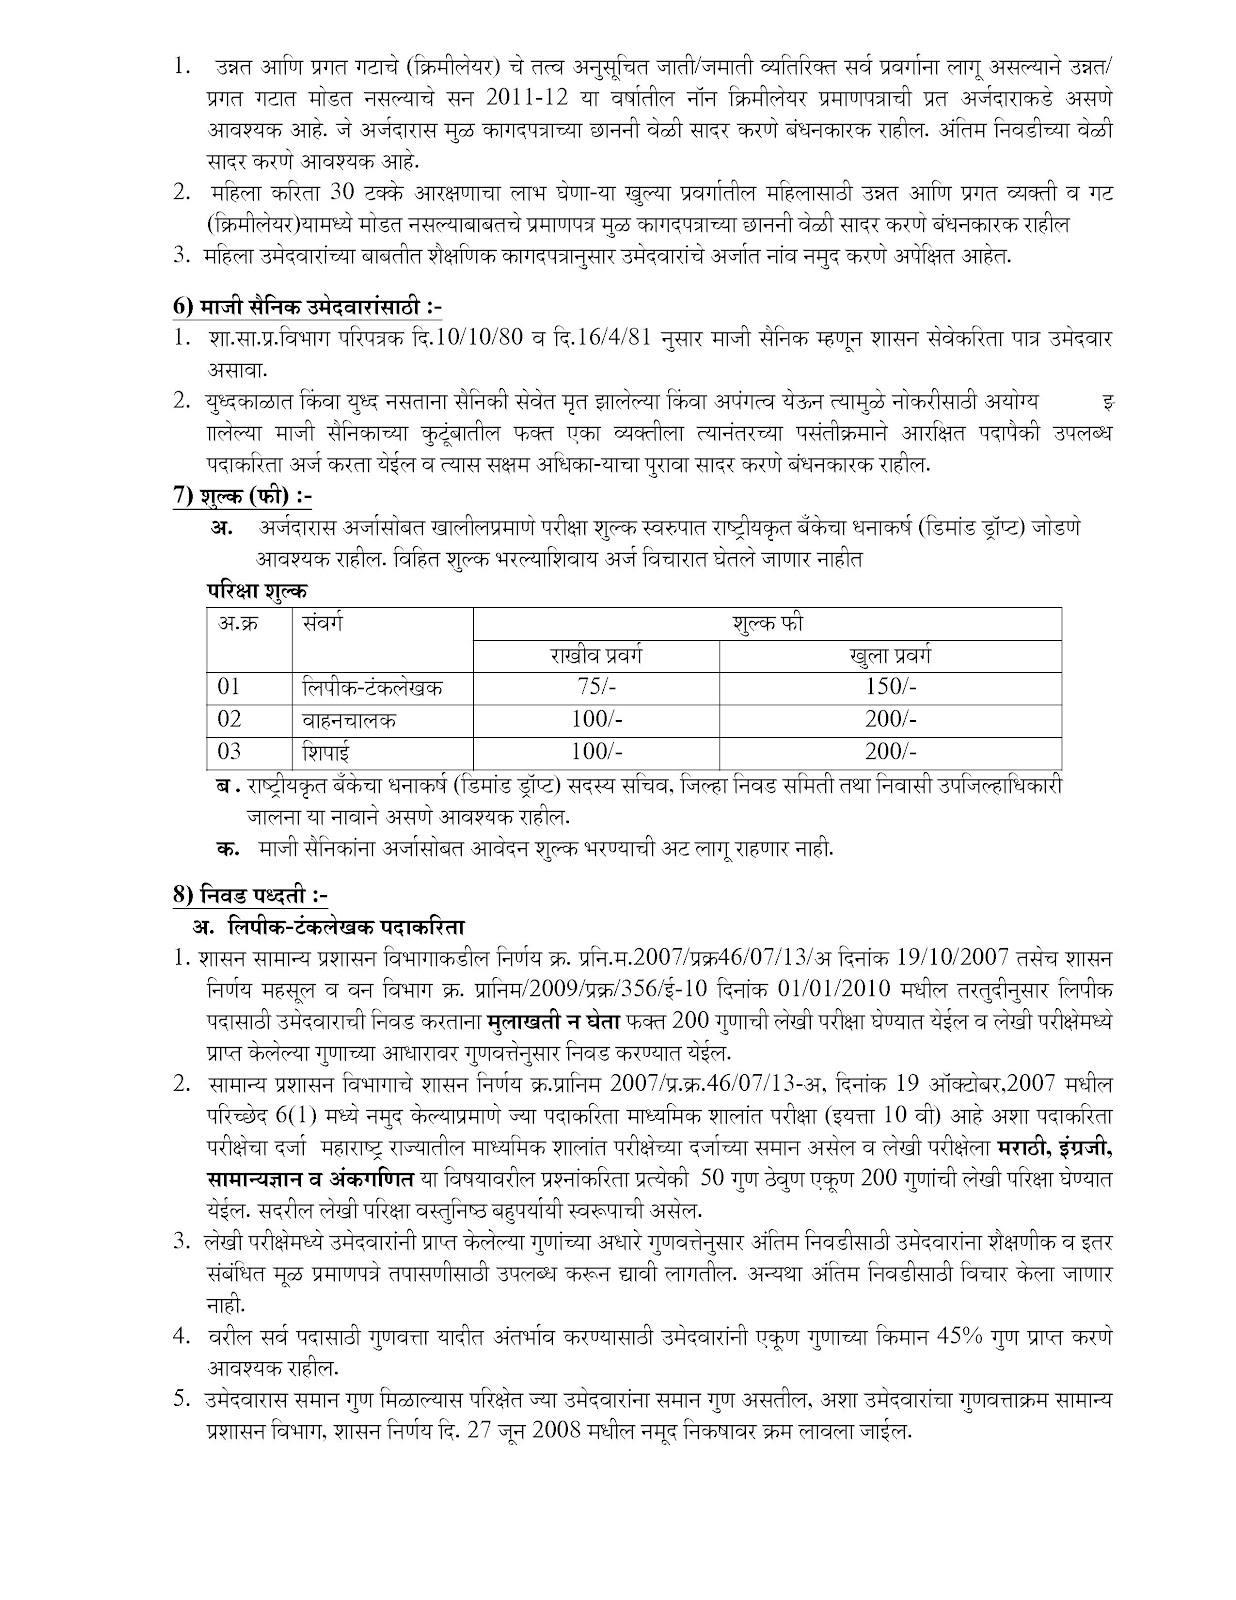 Collector Office Kolhapur Talathi Result 2011